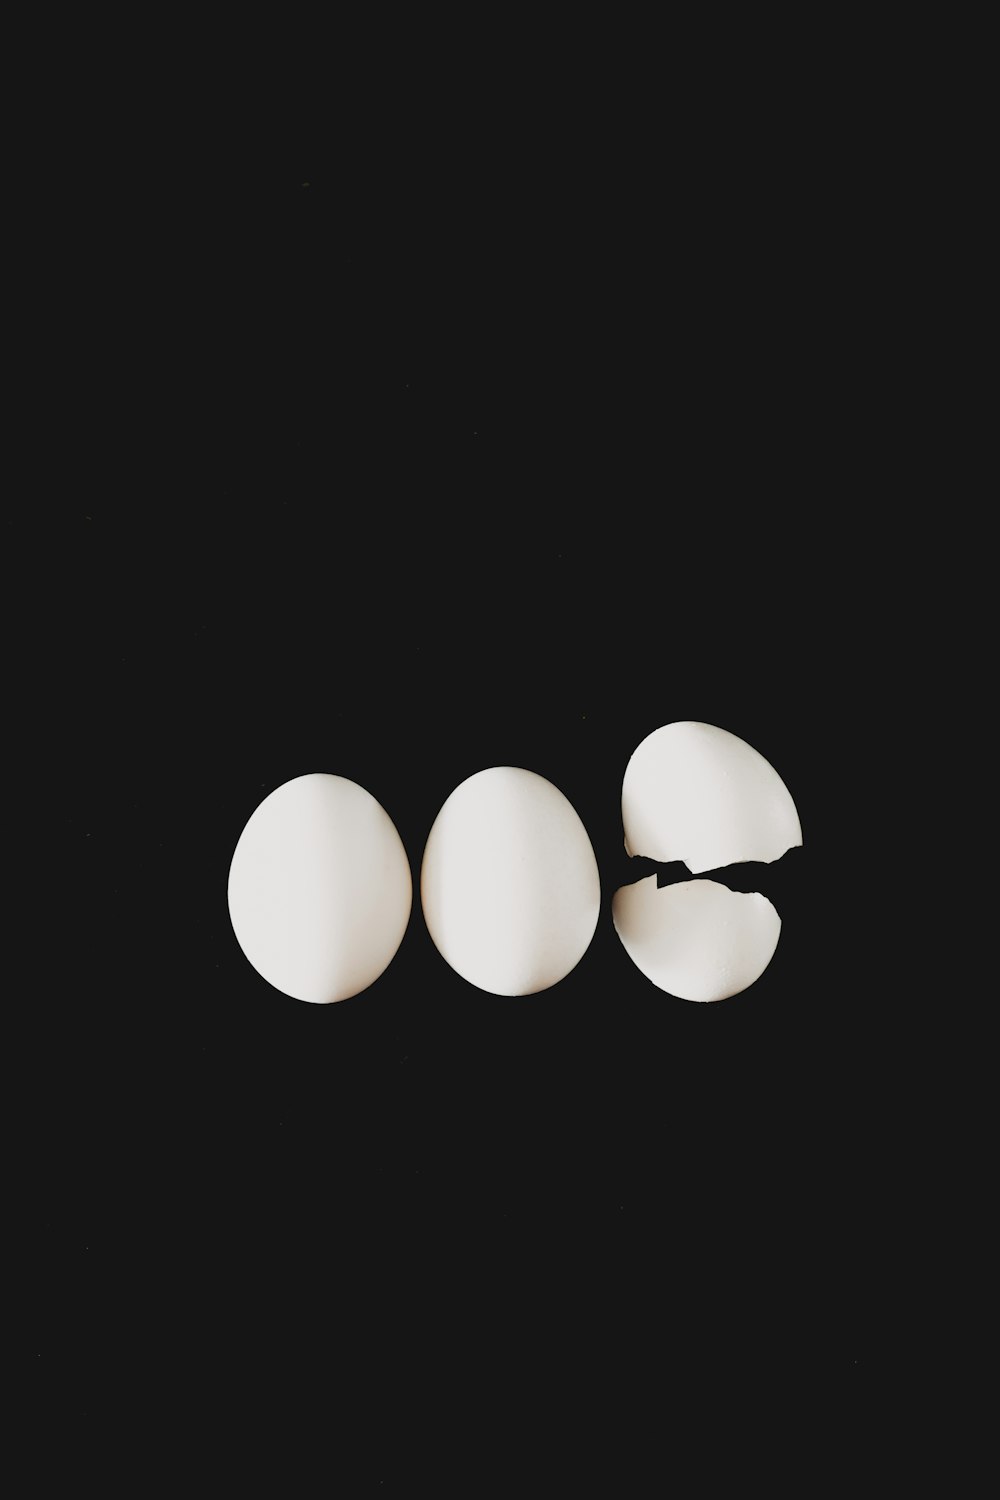 a group of three eggs sitting next to each other